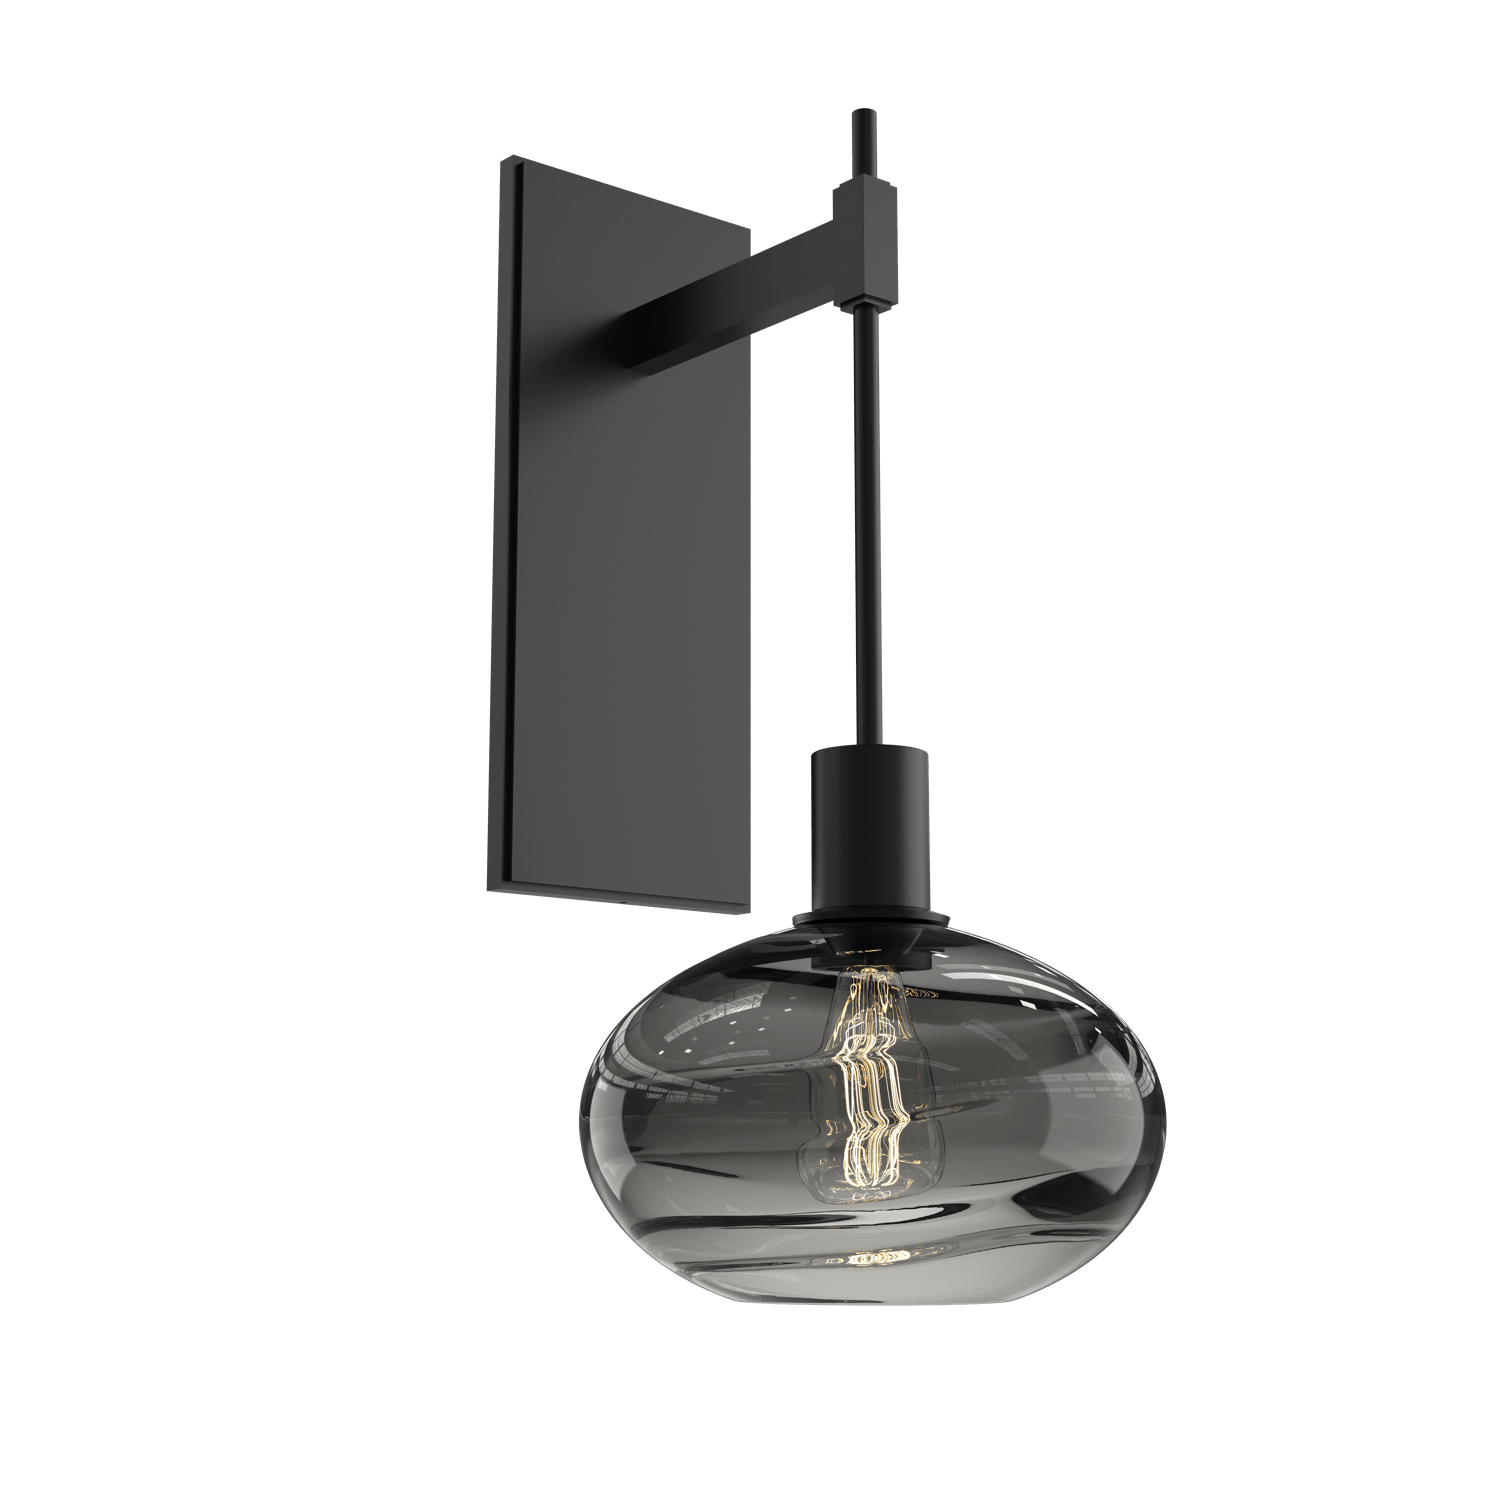 IDB0036-18-MB-OS-Hammerton-Studio-Optic-Blown-Glass-Coppa-tempo-wall-sconce-with-matte-black-finish-and-optic-smoke-blown-glass-shades-and-incandescent-lamping